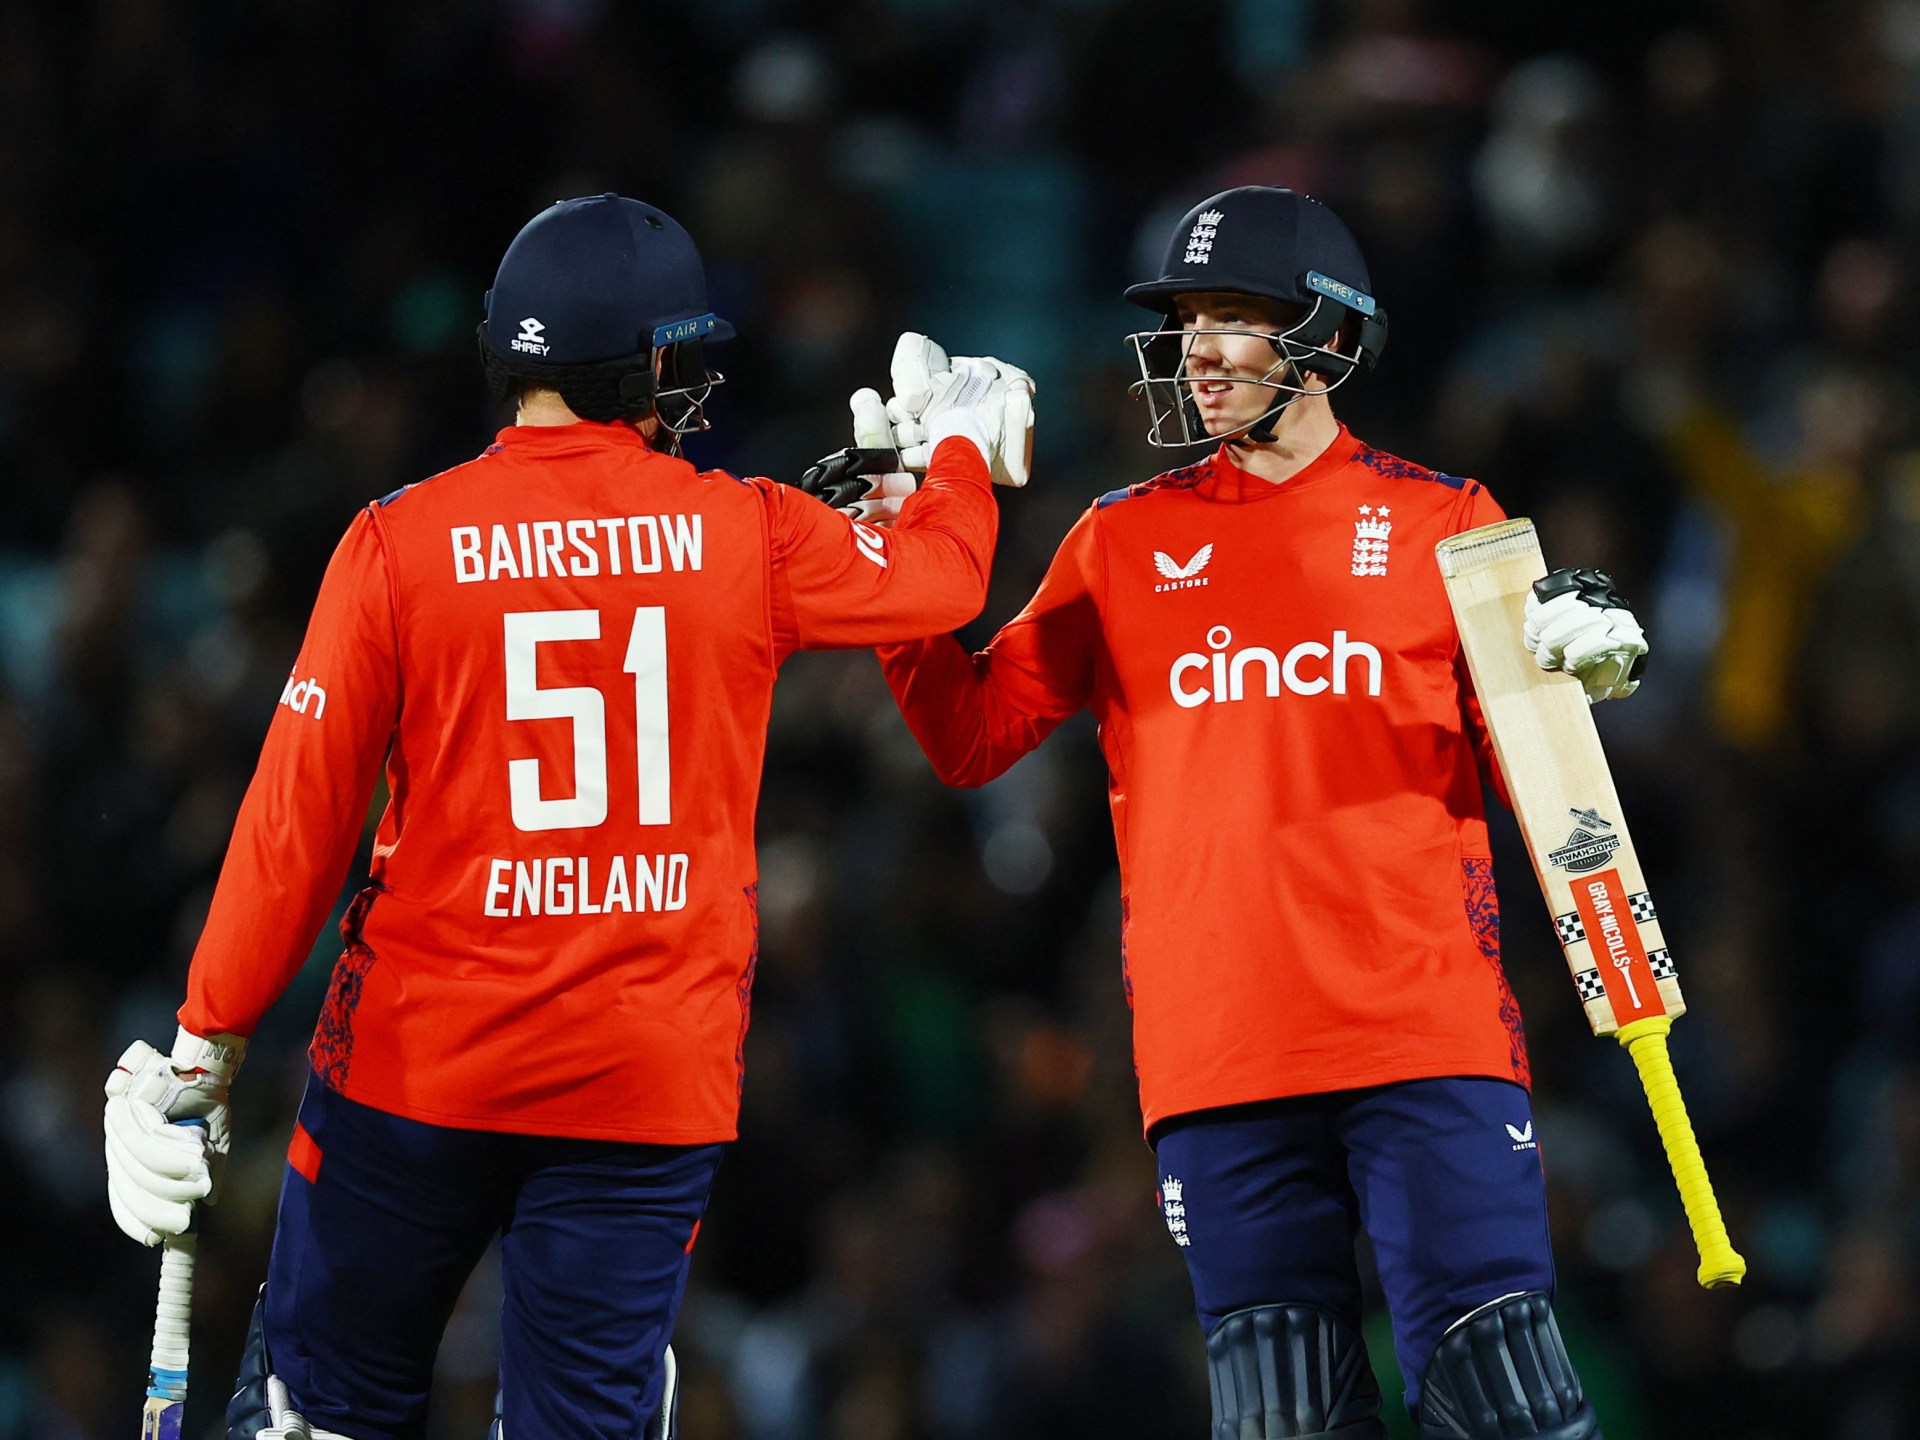 Australia vs England at T20 World Cup: Head-to-head, form, team news, pitch